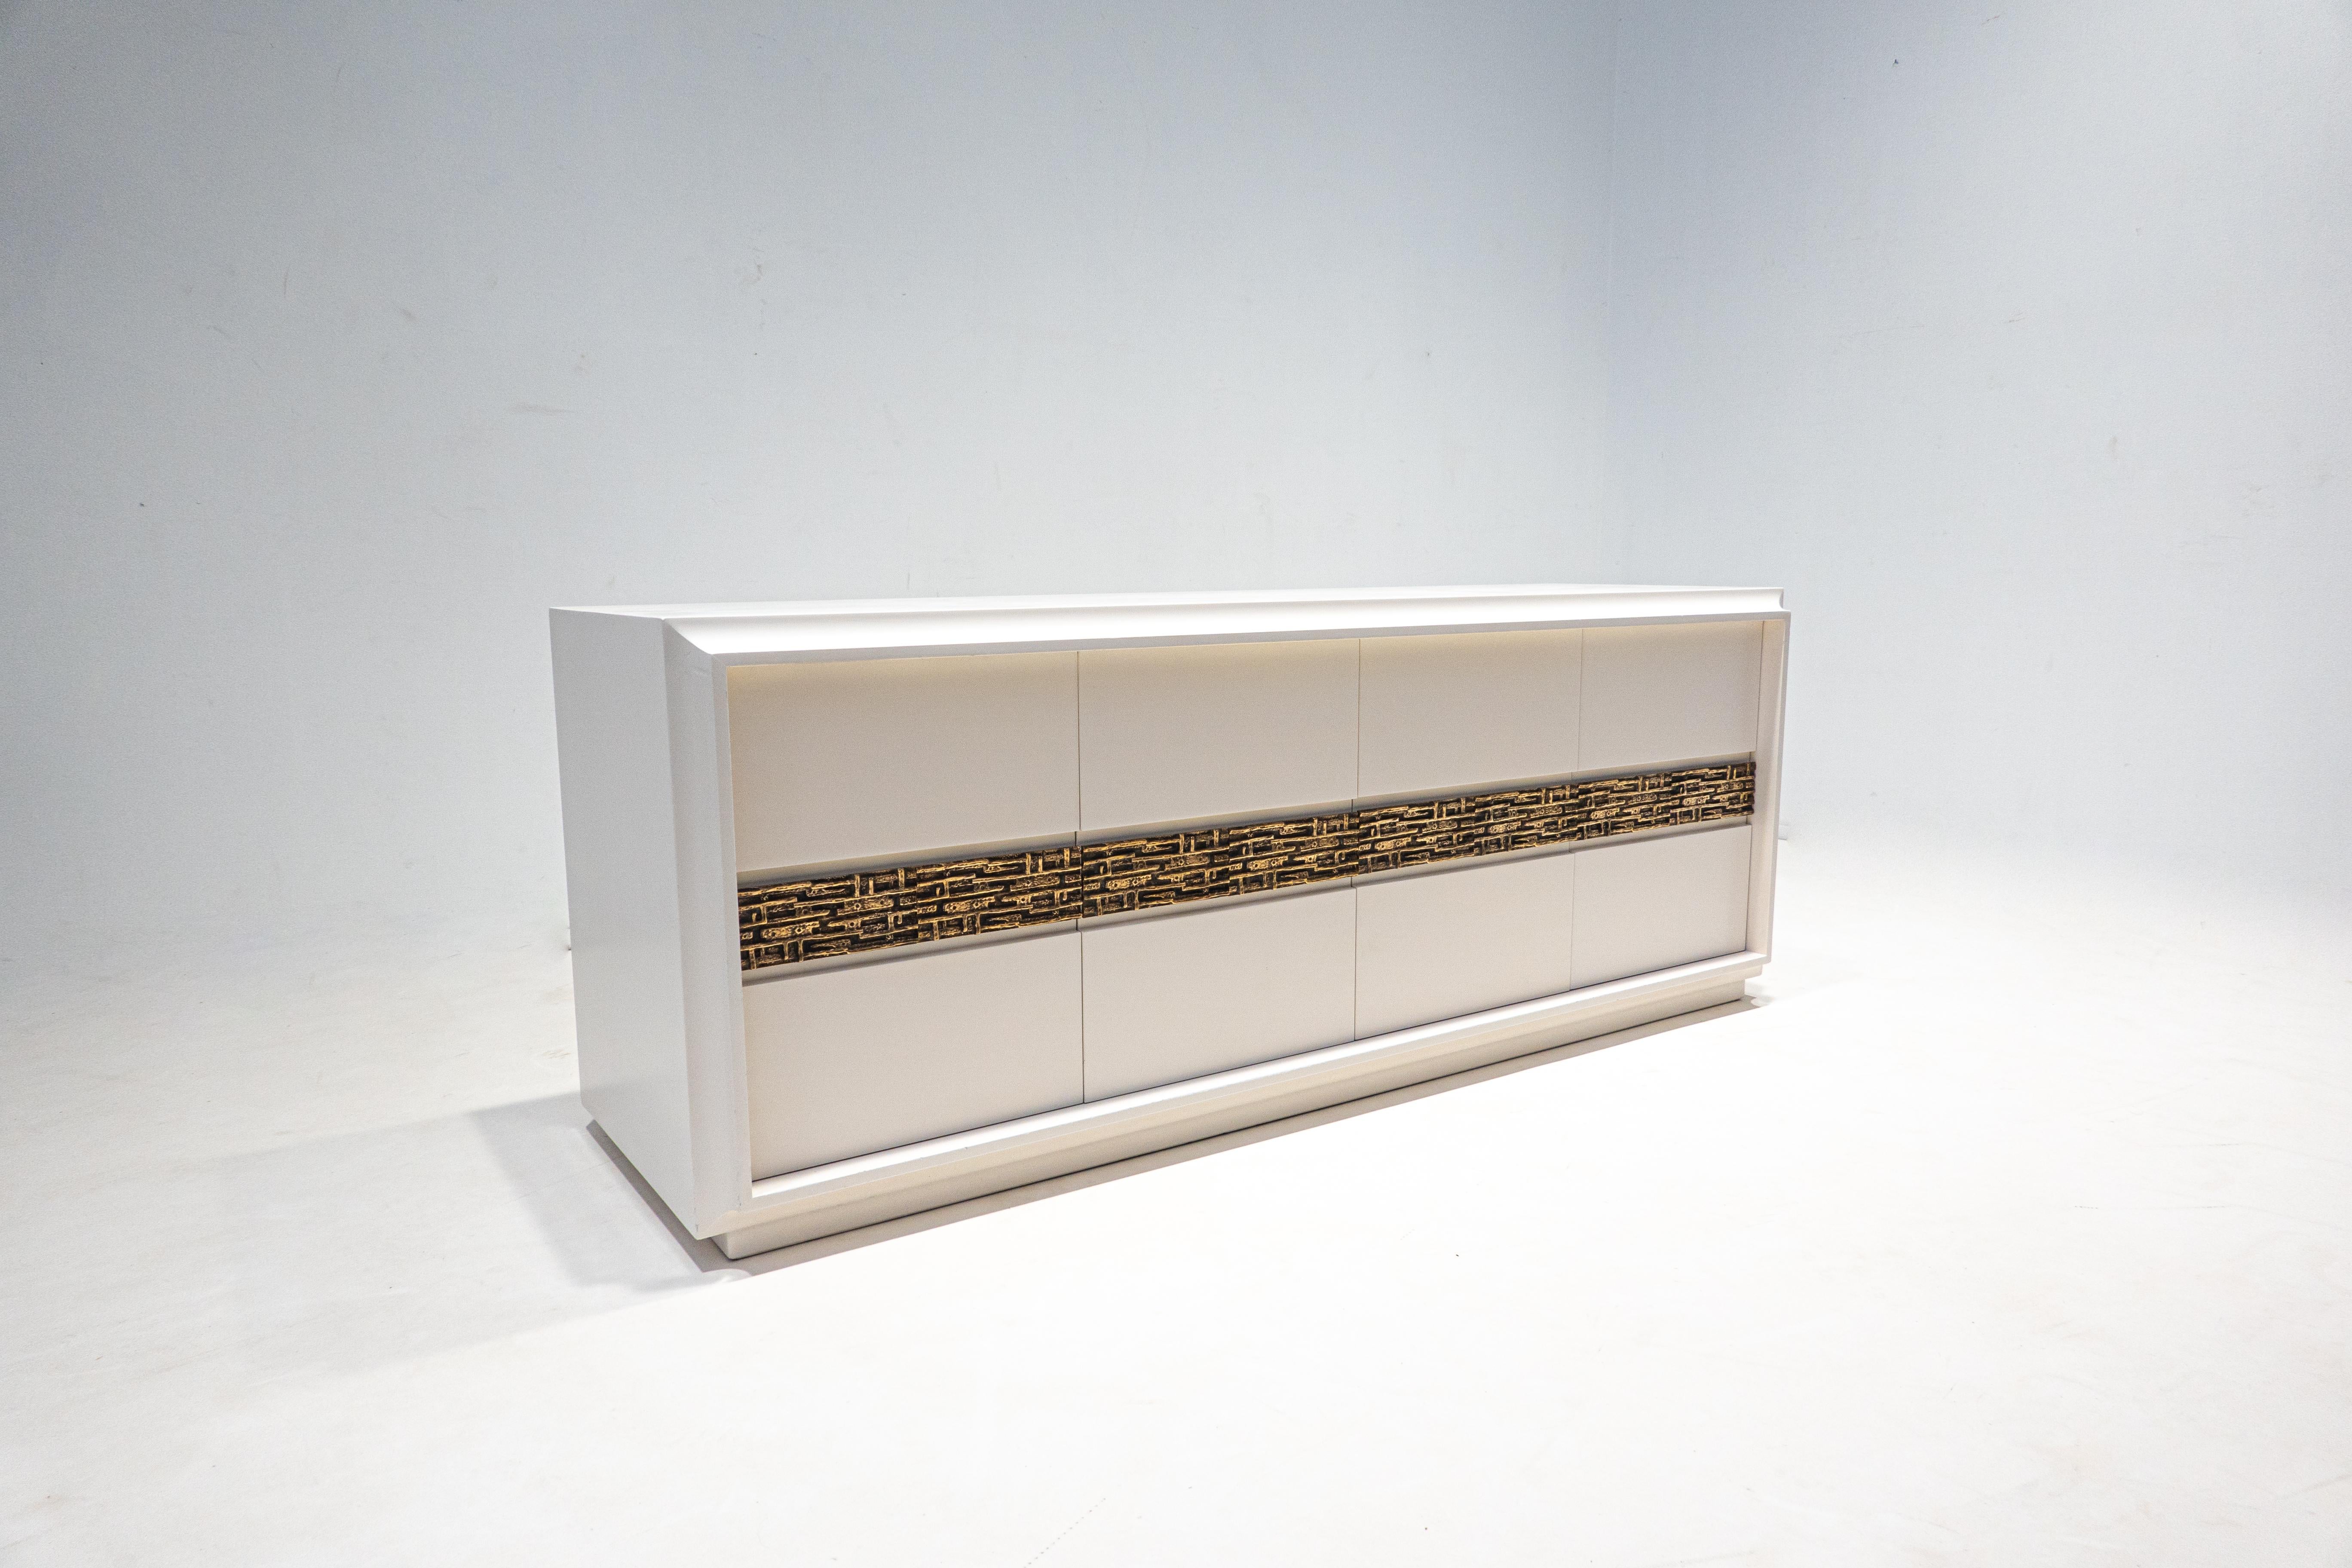 Italian Mid-Century Modern Sideboard by Luciano Frigerio for Desio, Italy, 1970s For Sale